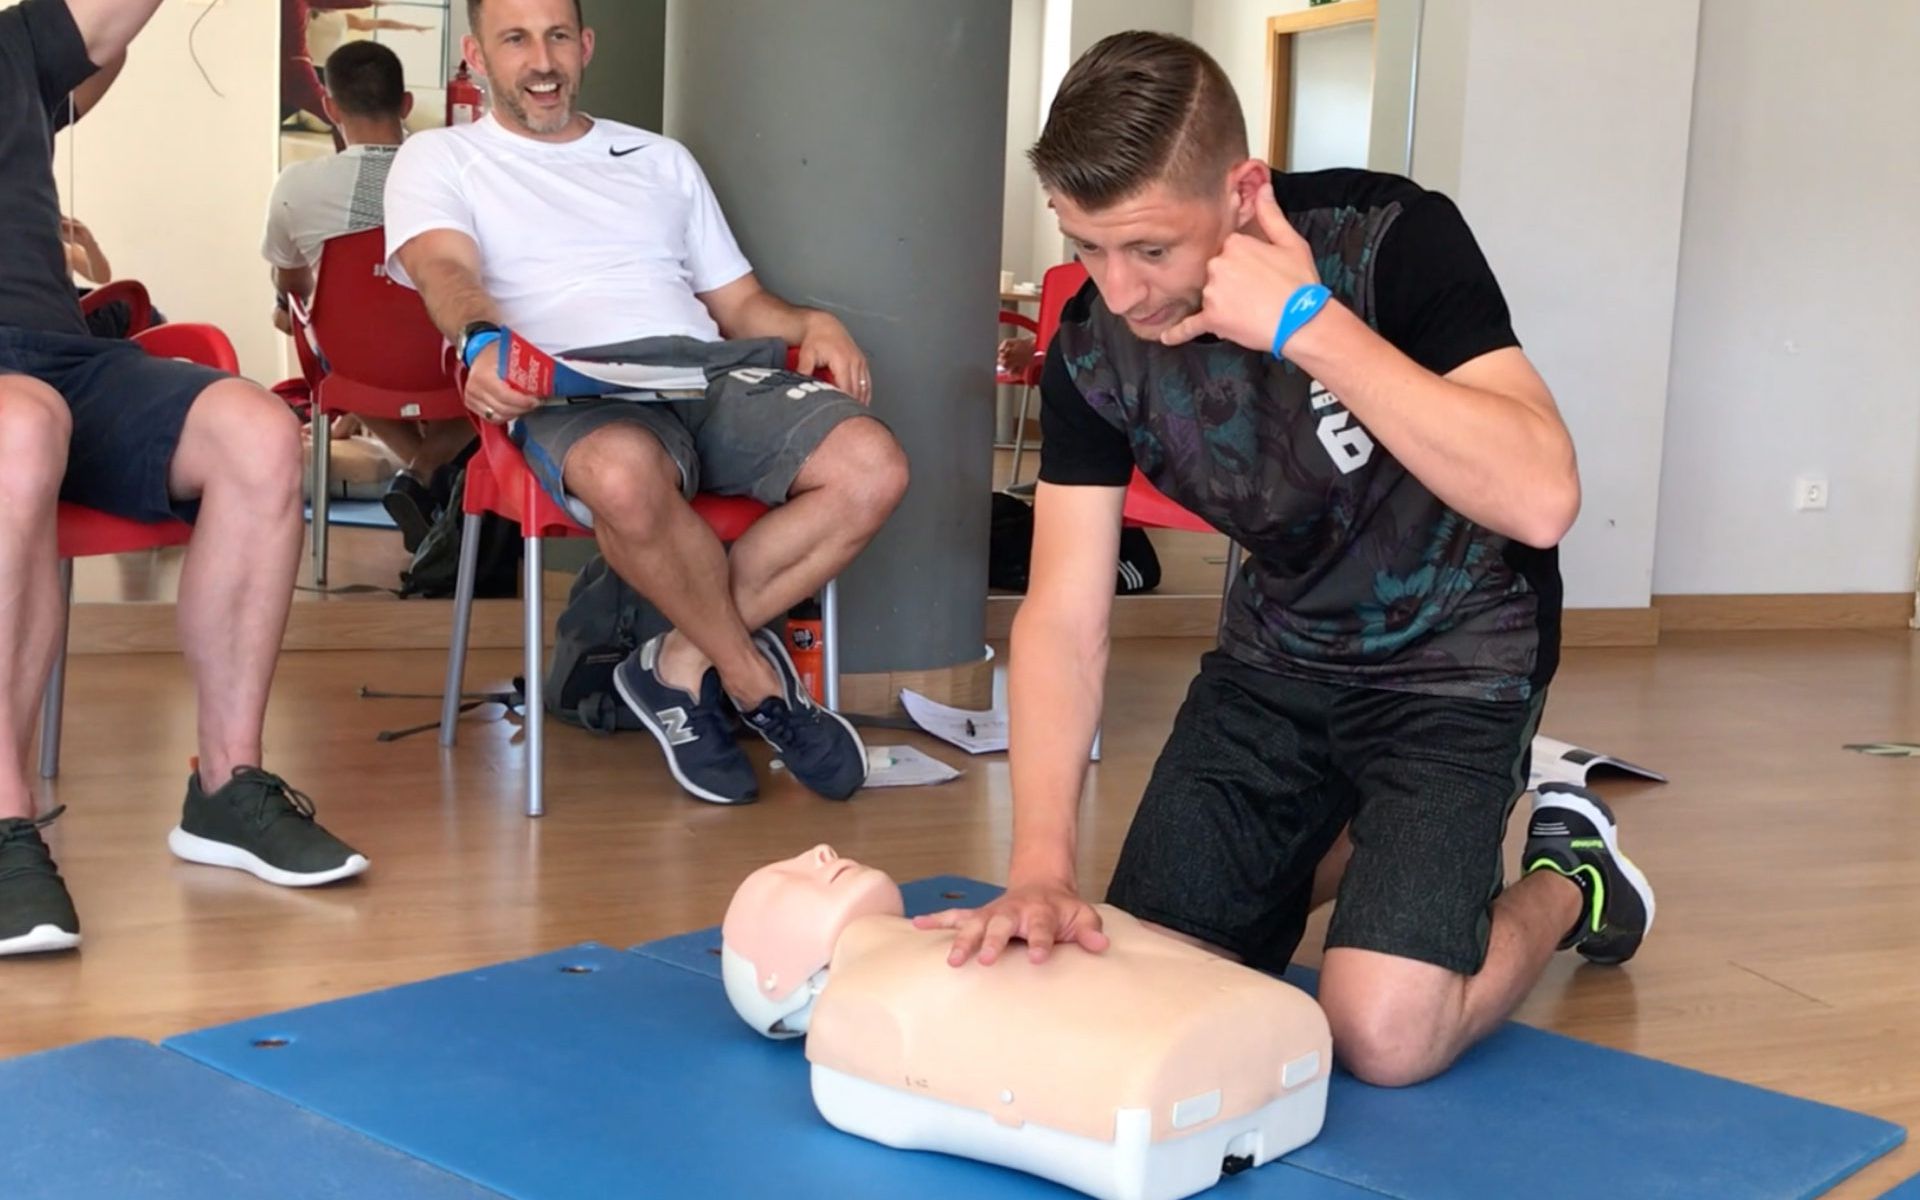 First Aid Courses For Personal Trainers: Do You Need It?